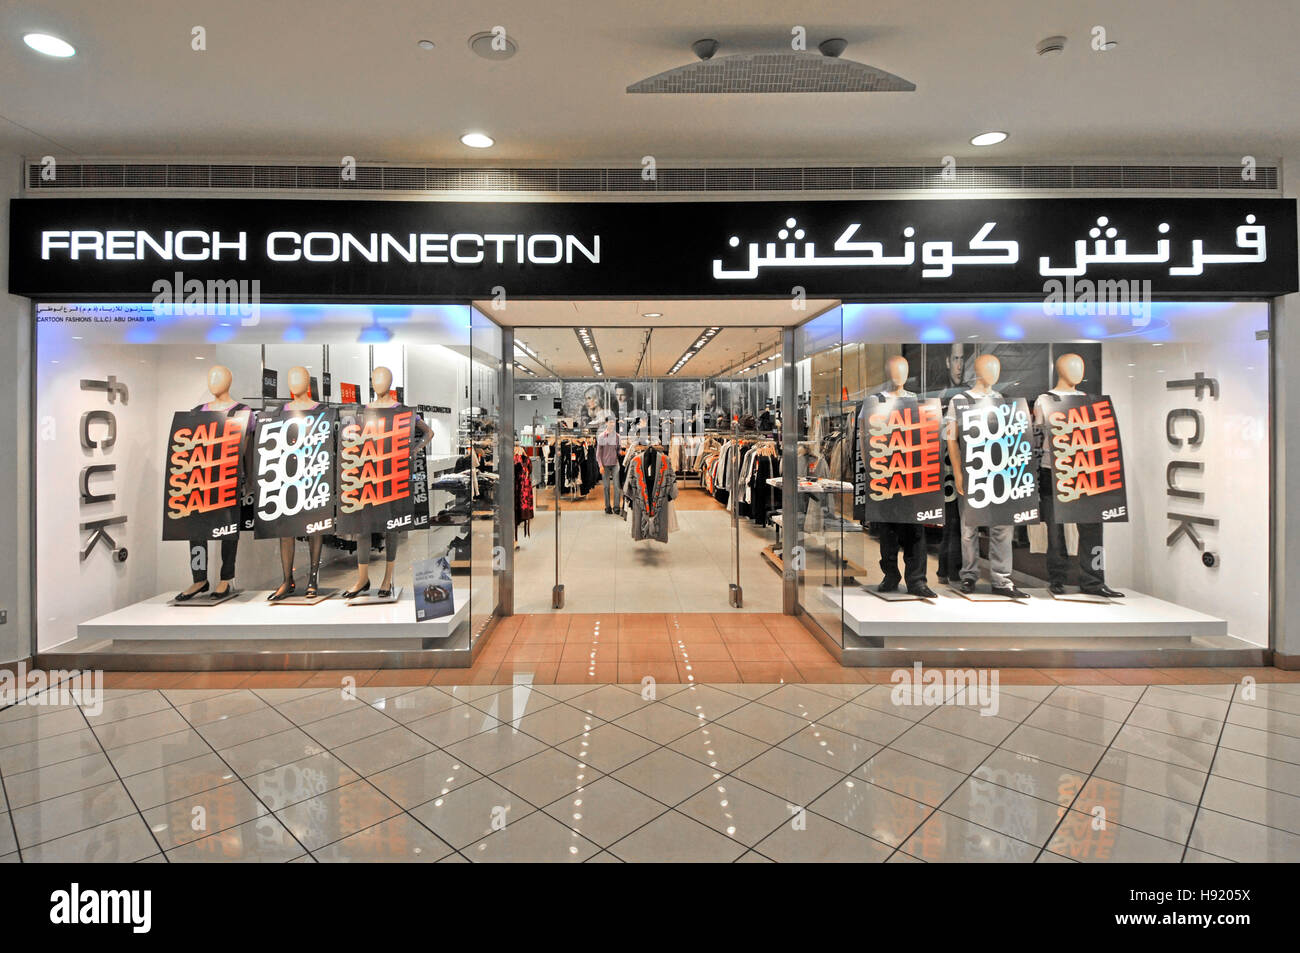 French Connection shop Abu Dhabi UAE middle east Marina shopping mall fcuk brand front window display interior bilingual multilingual sign Stock Photo